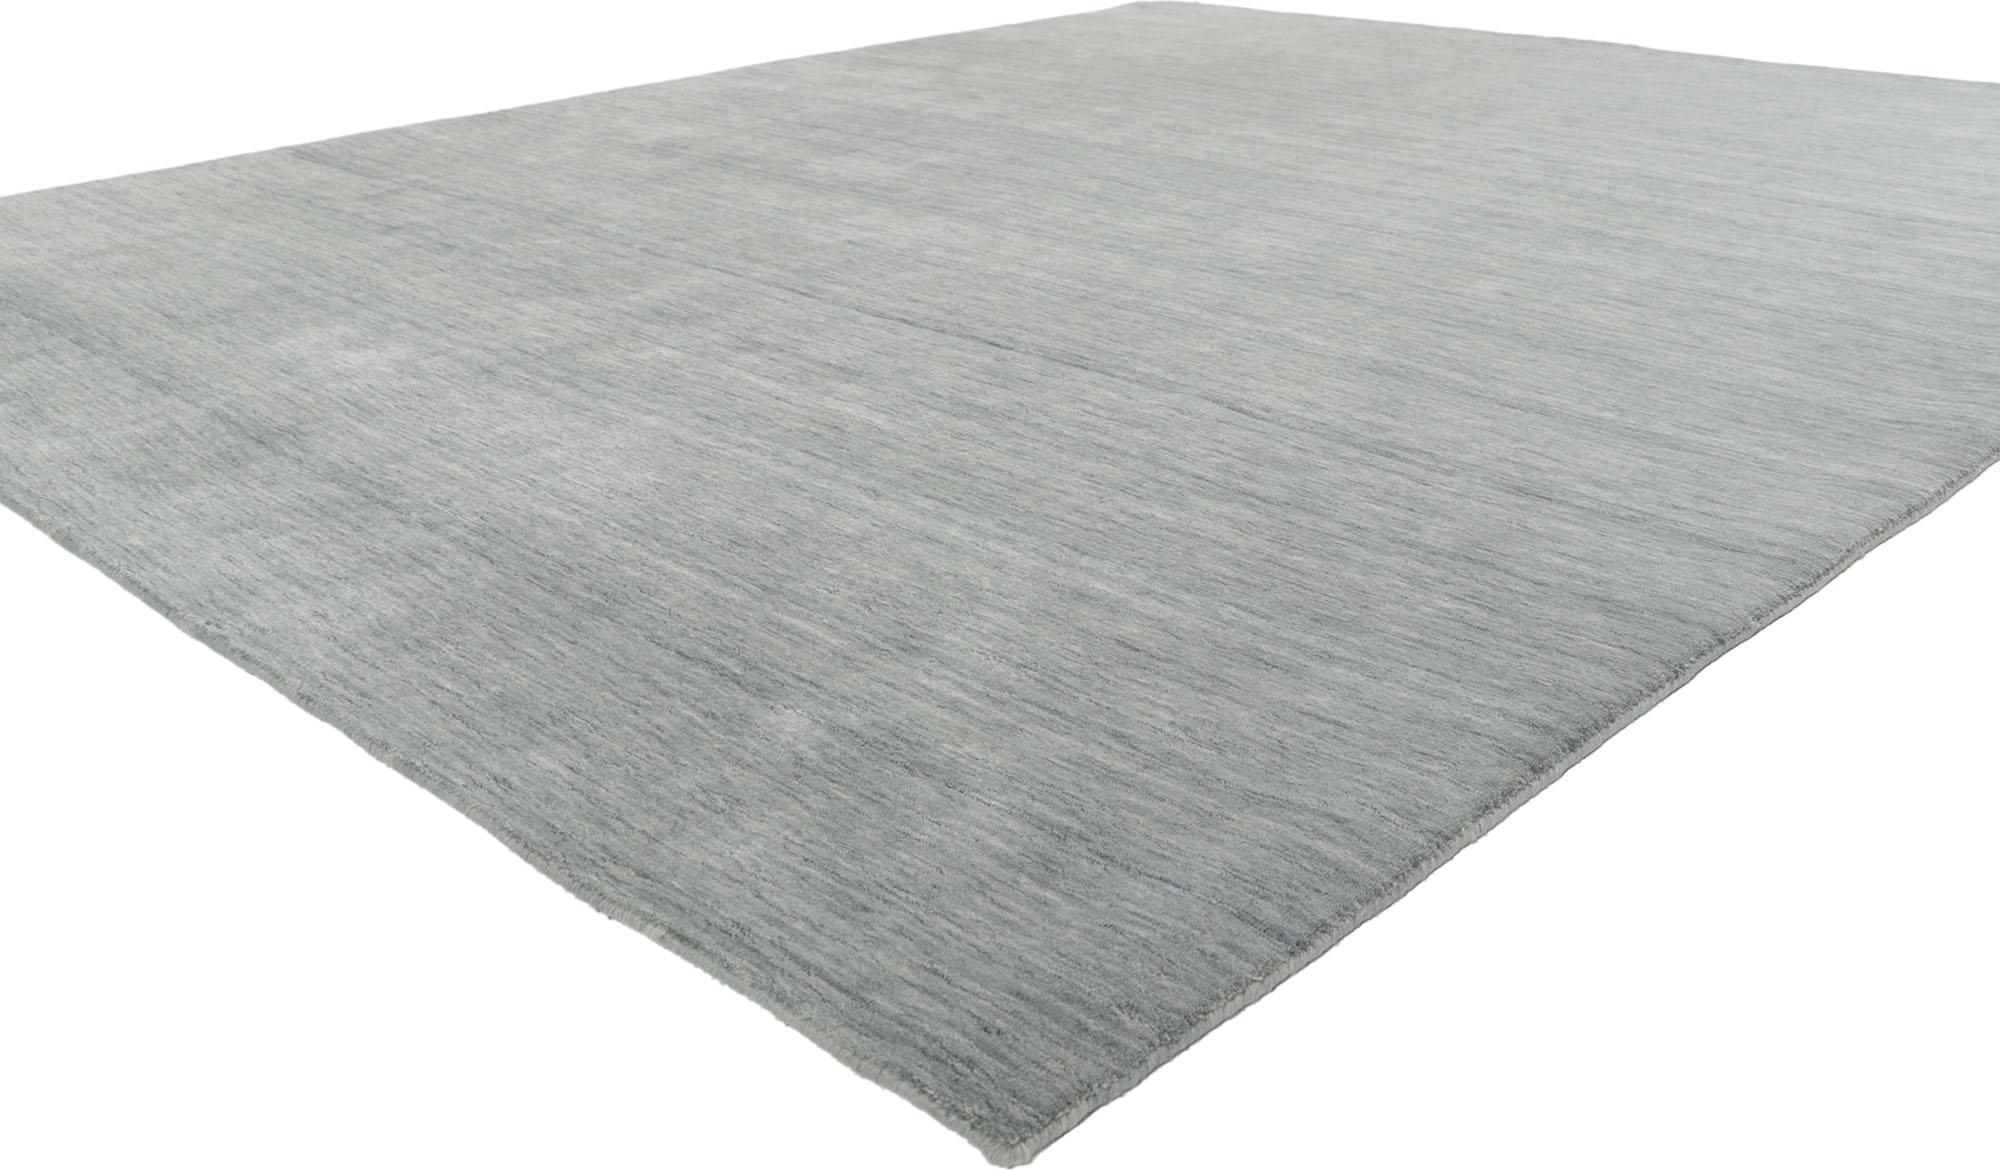 30743 new contemporary gray area rug with Modern style 08'03 x 09'11. Effortless beauty combined with simplicity and modern style, this hand-loom wool contemporary Indian rug provides a feeling of cozy contentment without the clutter. Imbued with